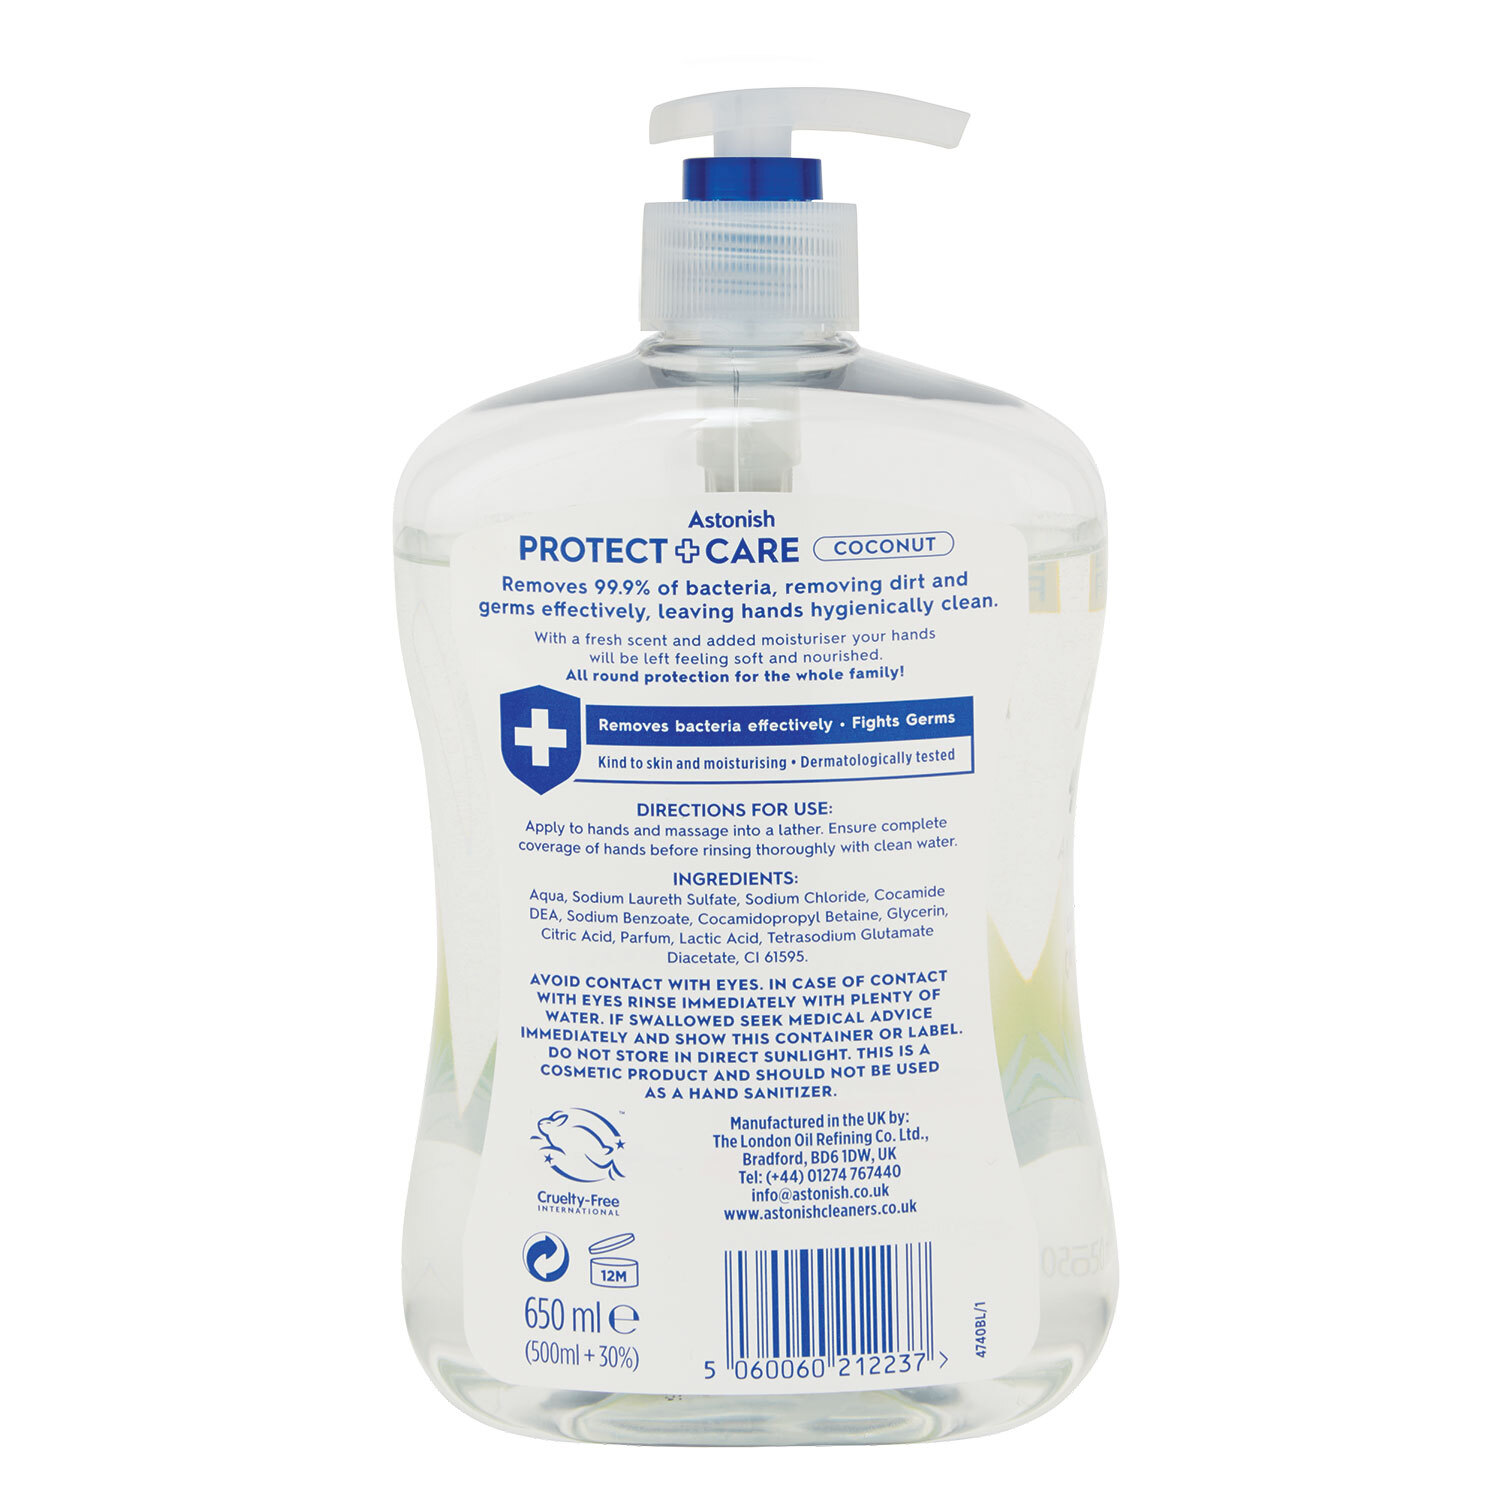 Astonish Protect and Care Coconut Anti-Bacterial Handwash 650ml Image 2